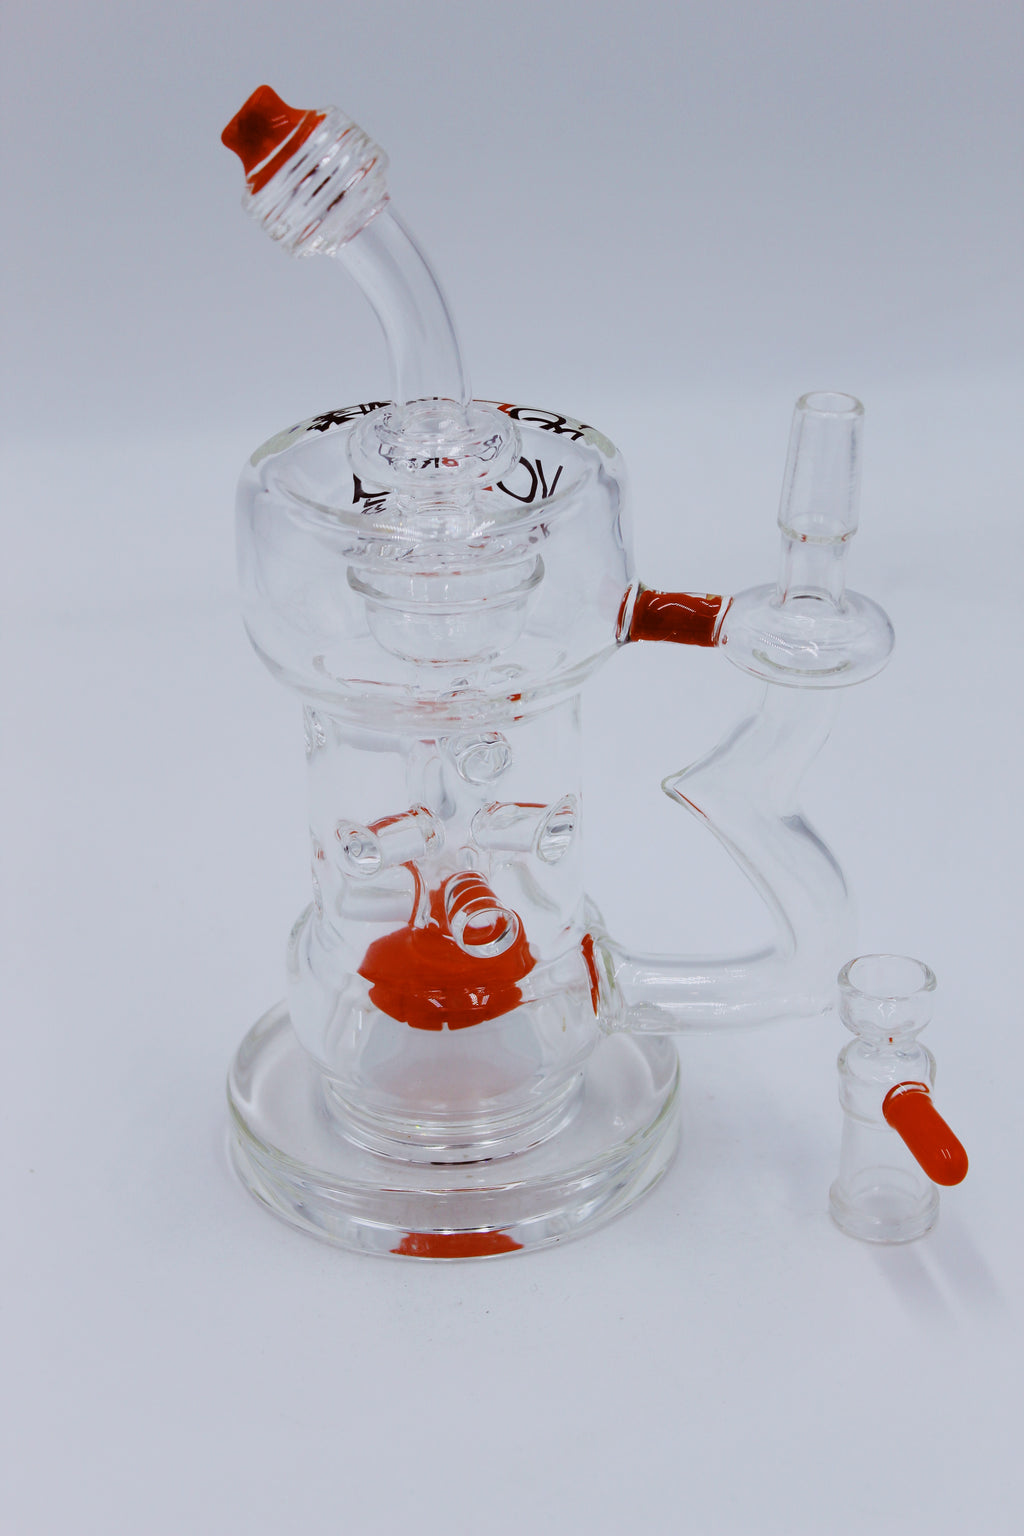 VODKA GLASS 9MM RIG - Smoke Country - Land of the artistic glass blown bongs